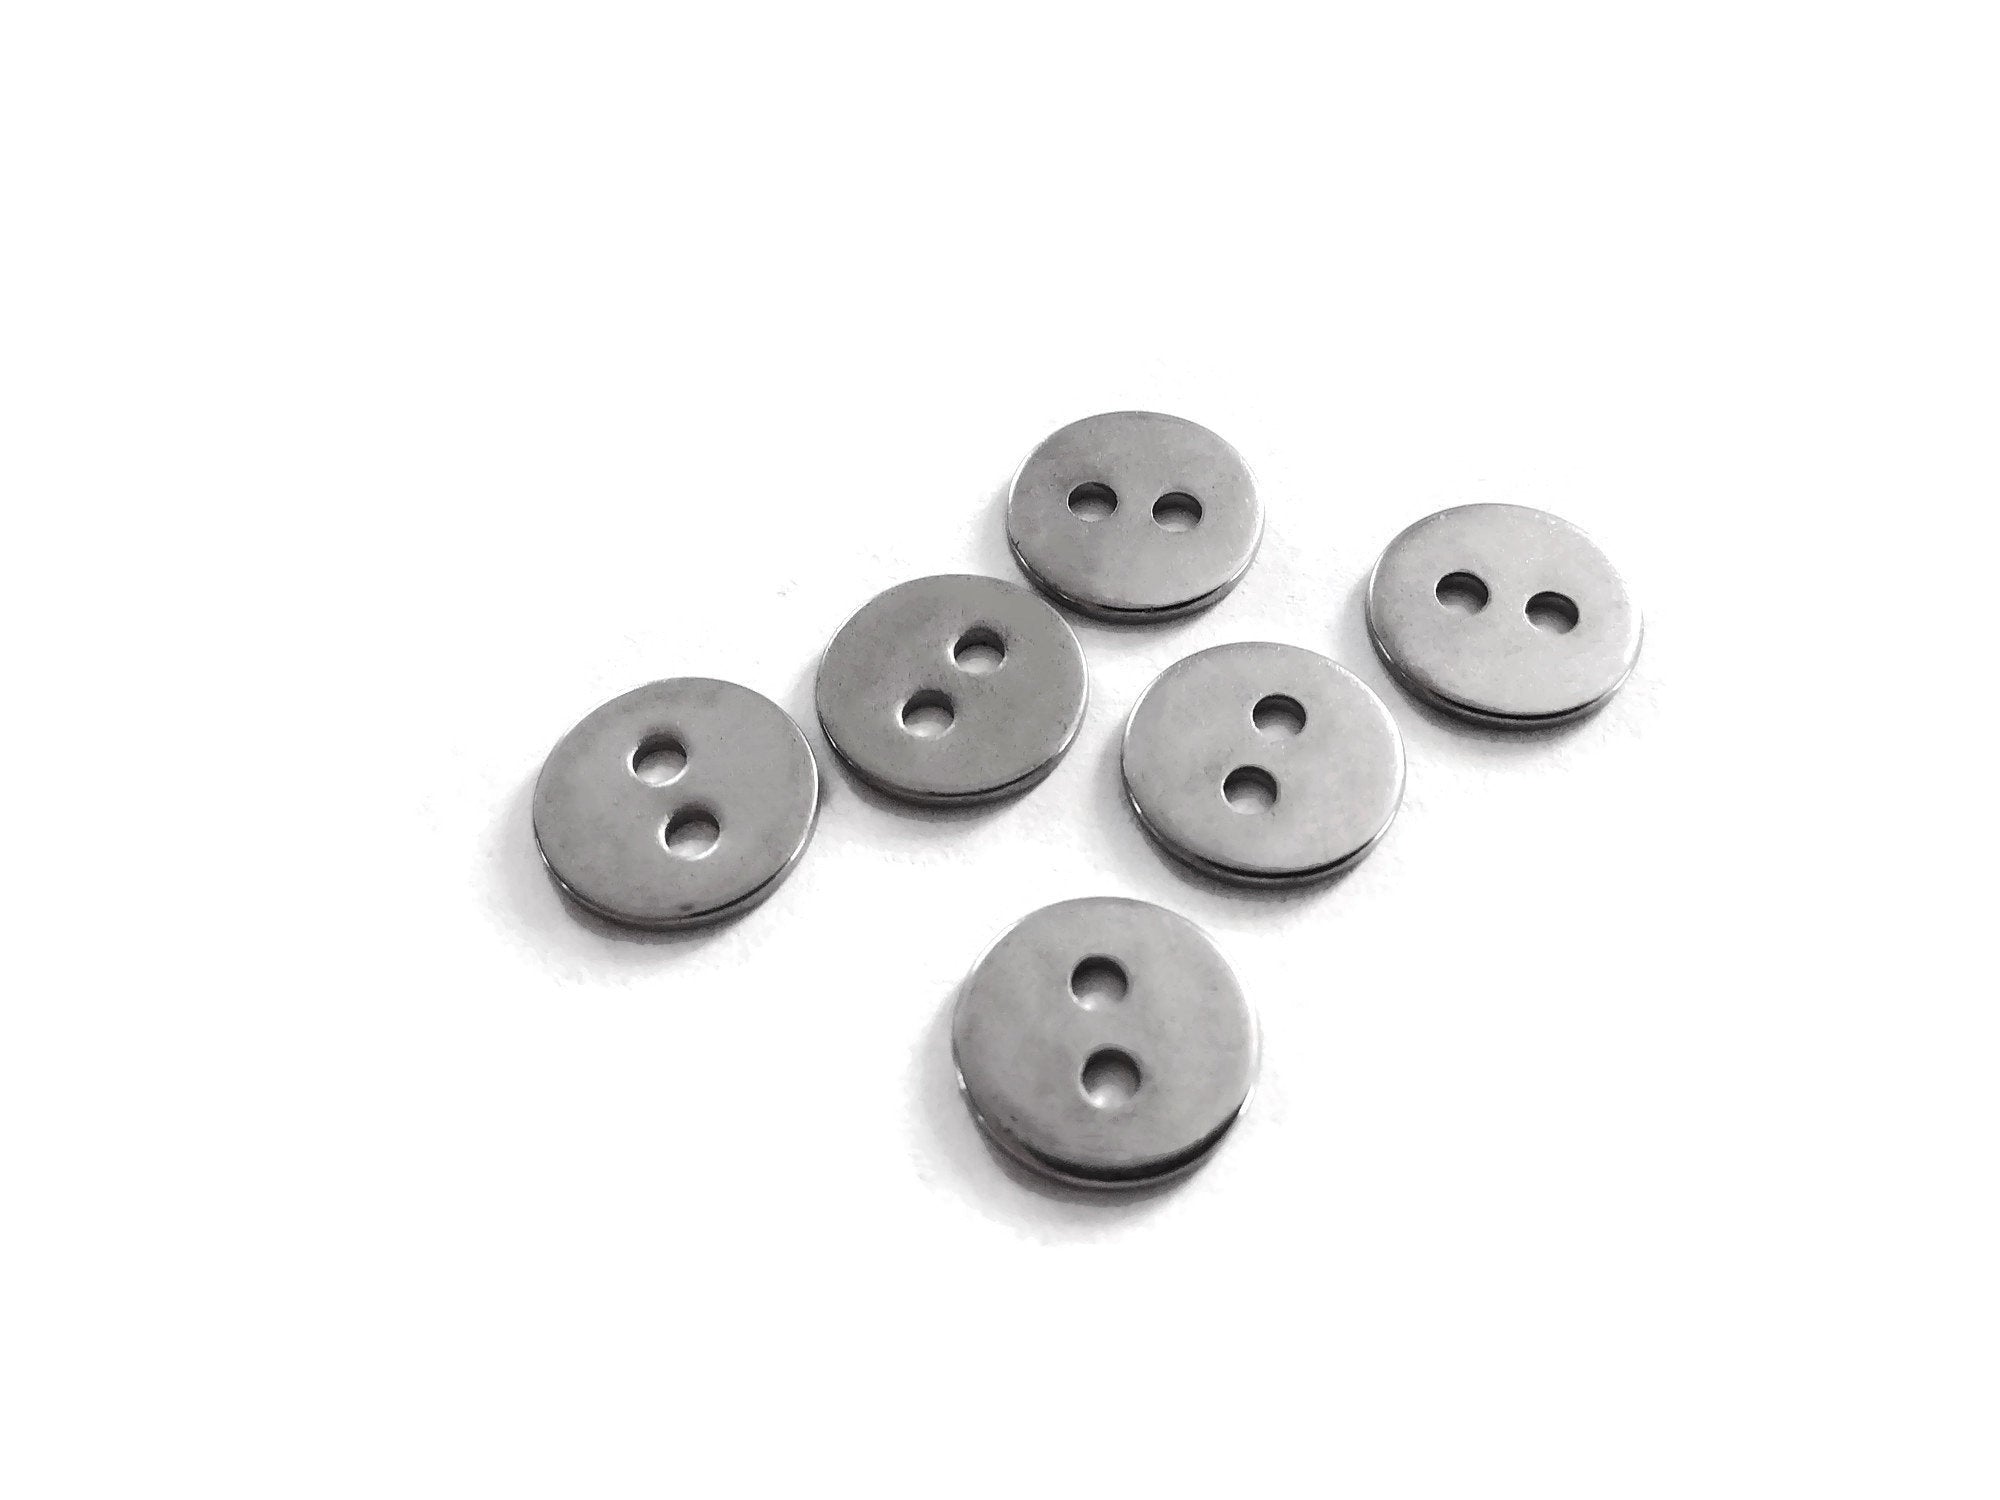 6 silver metal buttons, stainless steel buttons or clasps, round buttons 12mm 